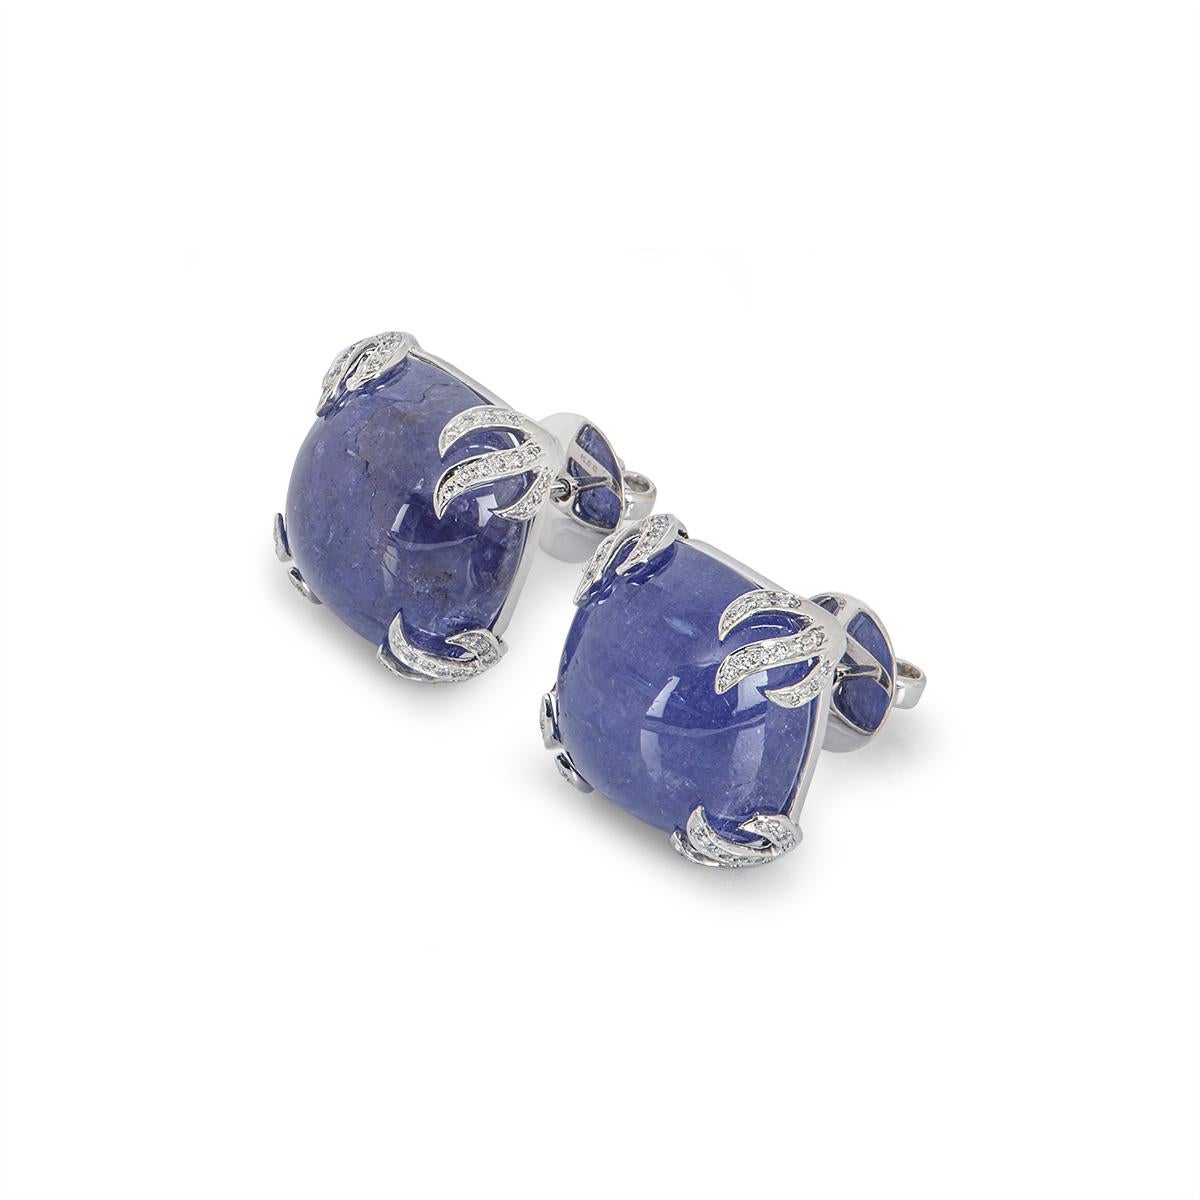 An exquisite pair of tanzanite and diamond stud earrings. The earrings feature two cushion cut cabochons with an approximate weight of 48.65ct with a strong bluish violet hue set in a fancy four claw setting. The tanzanites are further complemented